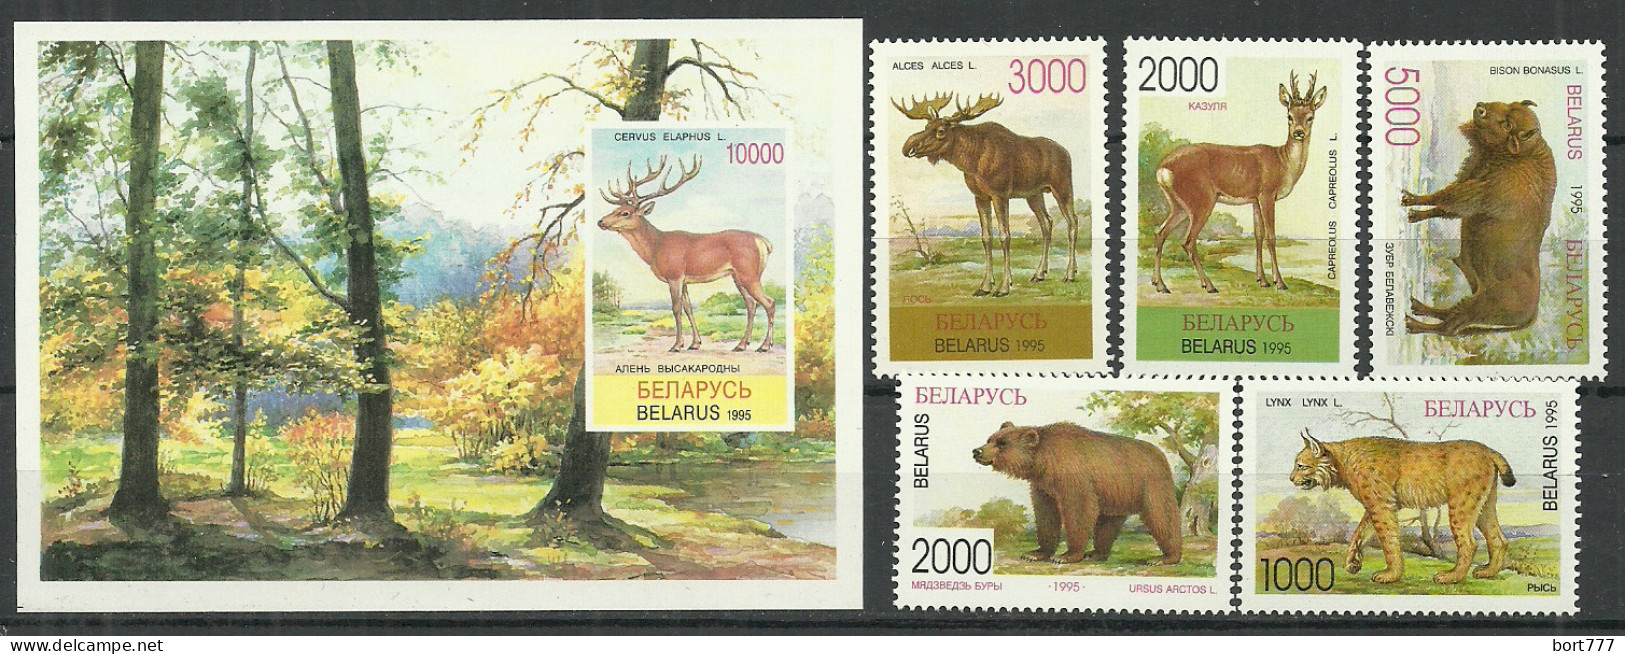 BELARUS Mint Stamps MNH(**), 1995-96 Years - Wild Animals - Wit-Rusland